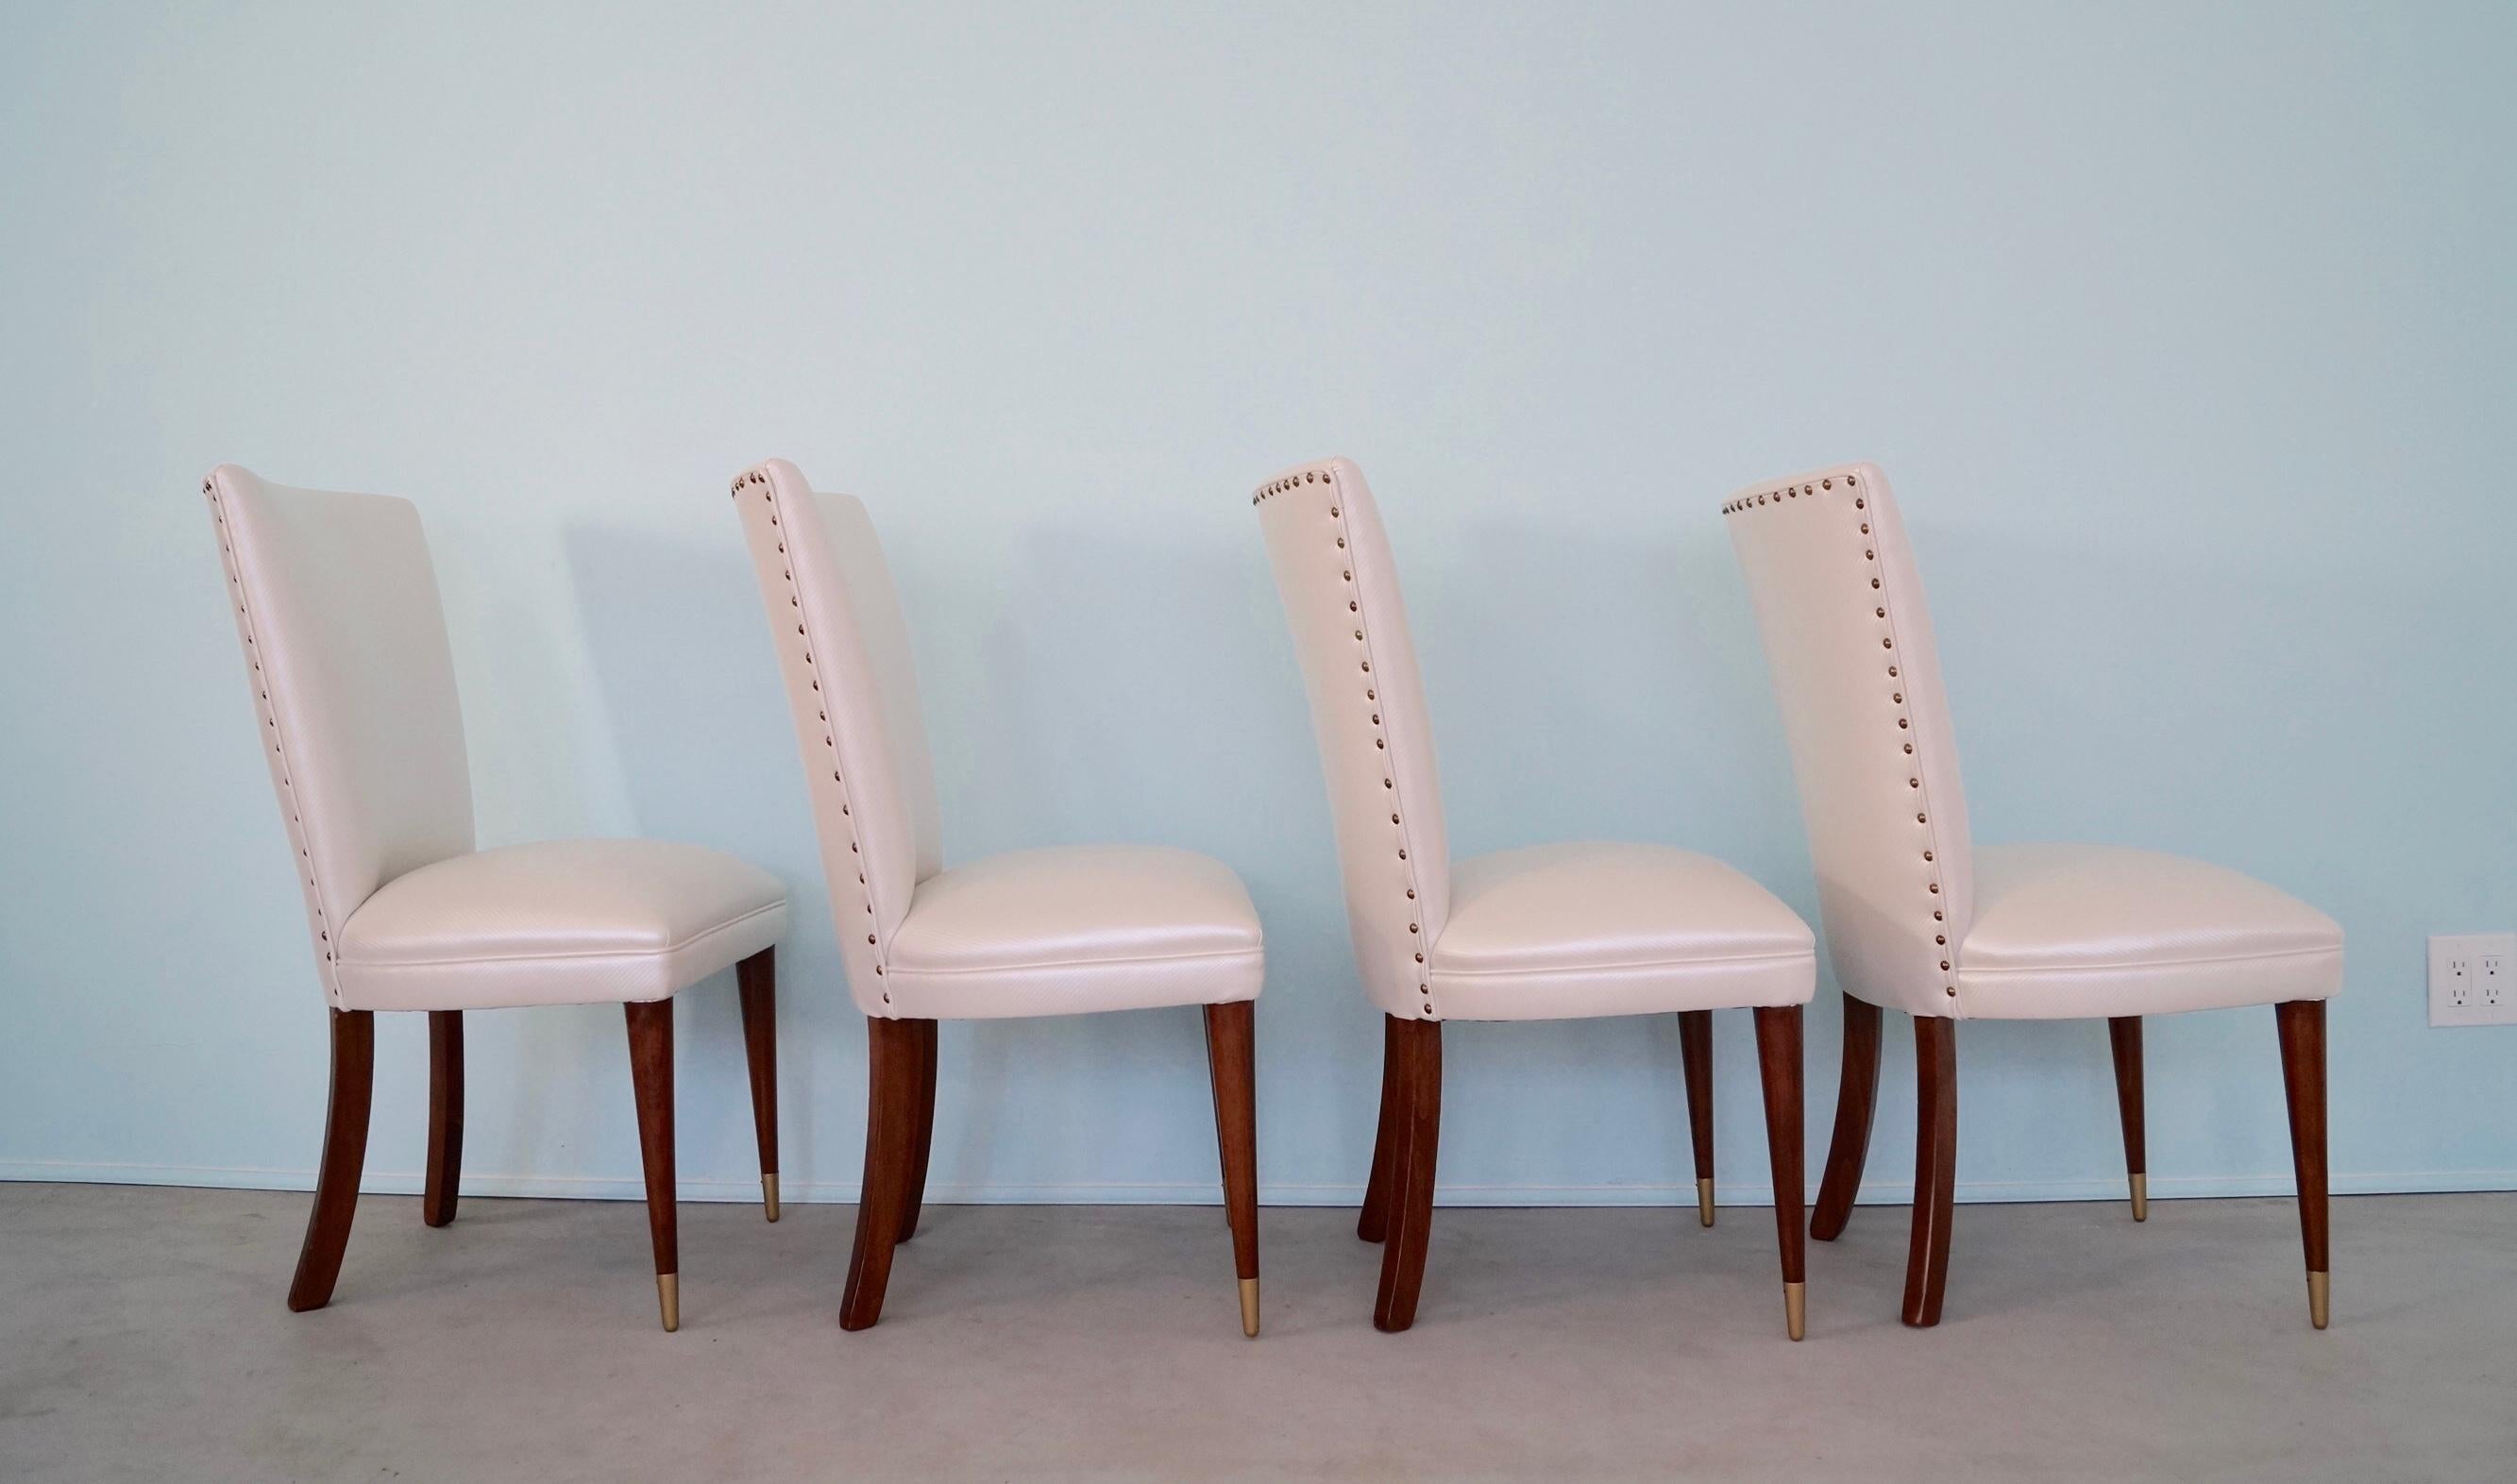 1950's Mid-Century Modern Hollywood Regency Dining Chairs - Set of 4 For Sale 2